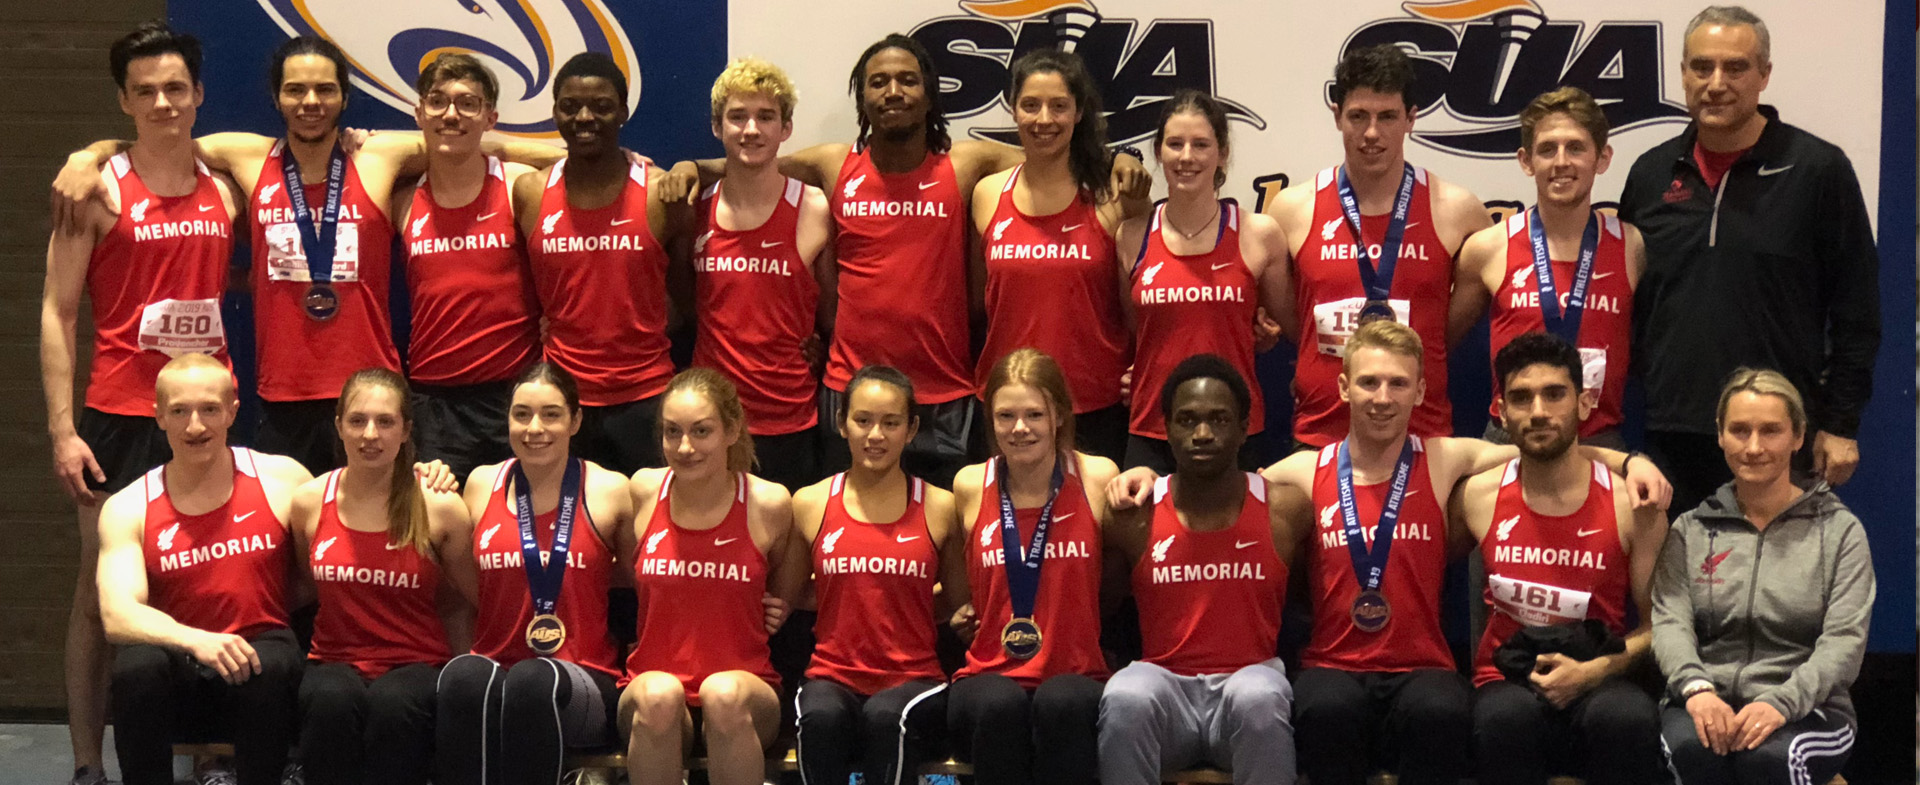 Successful Showing For Sea-Hawks at T&F Championships